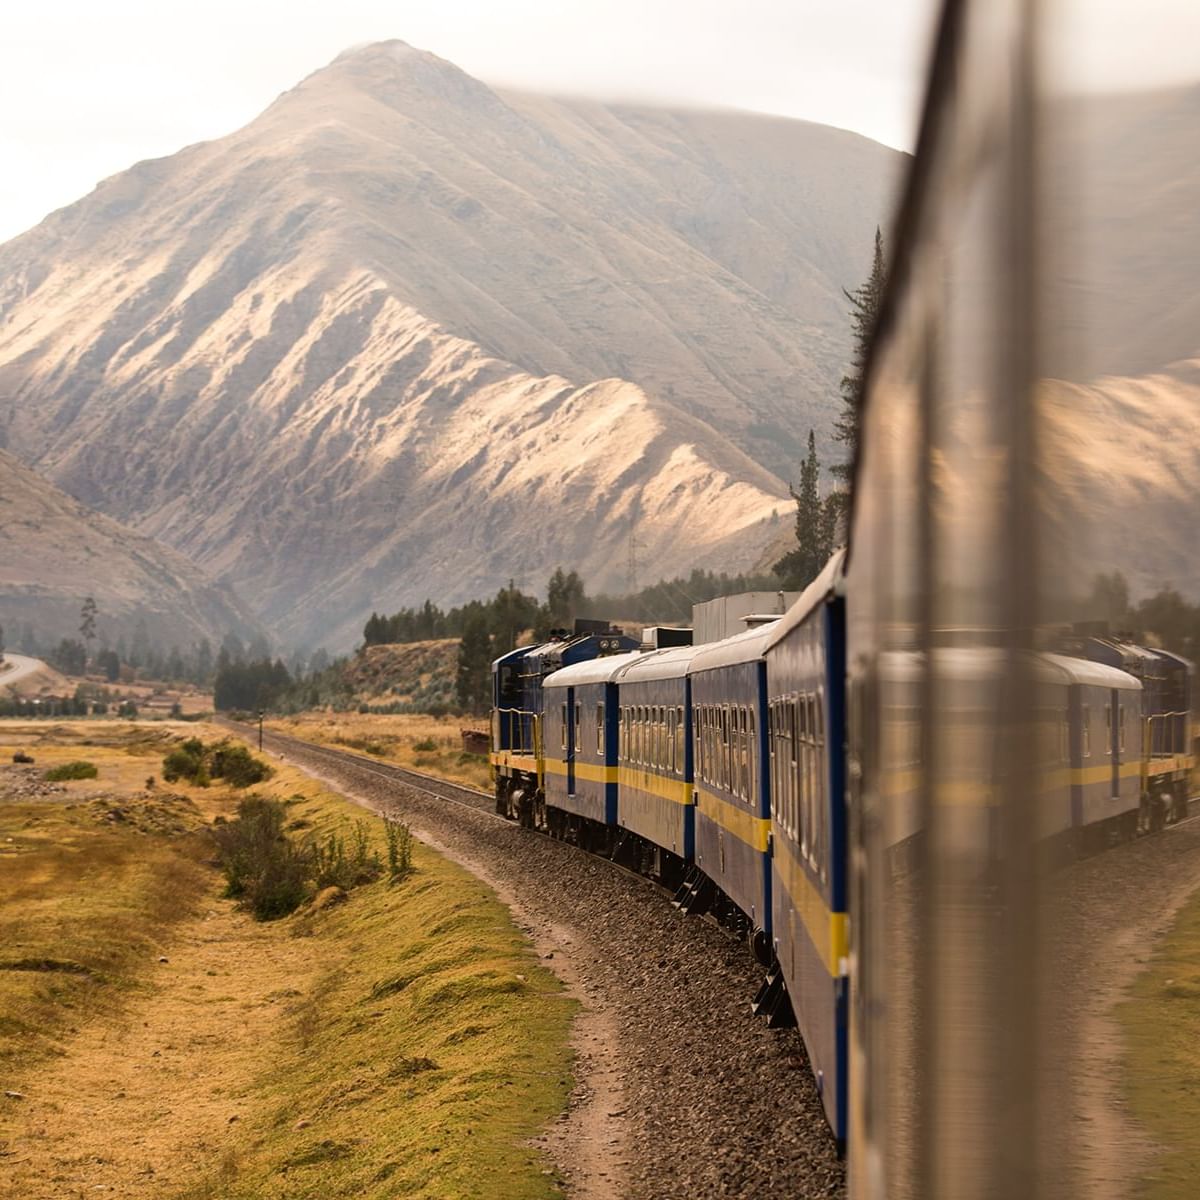 View of the train and mountains on the way to Machu Picchu